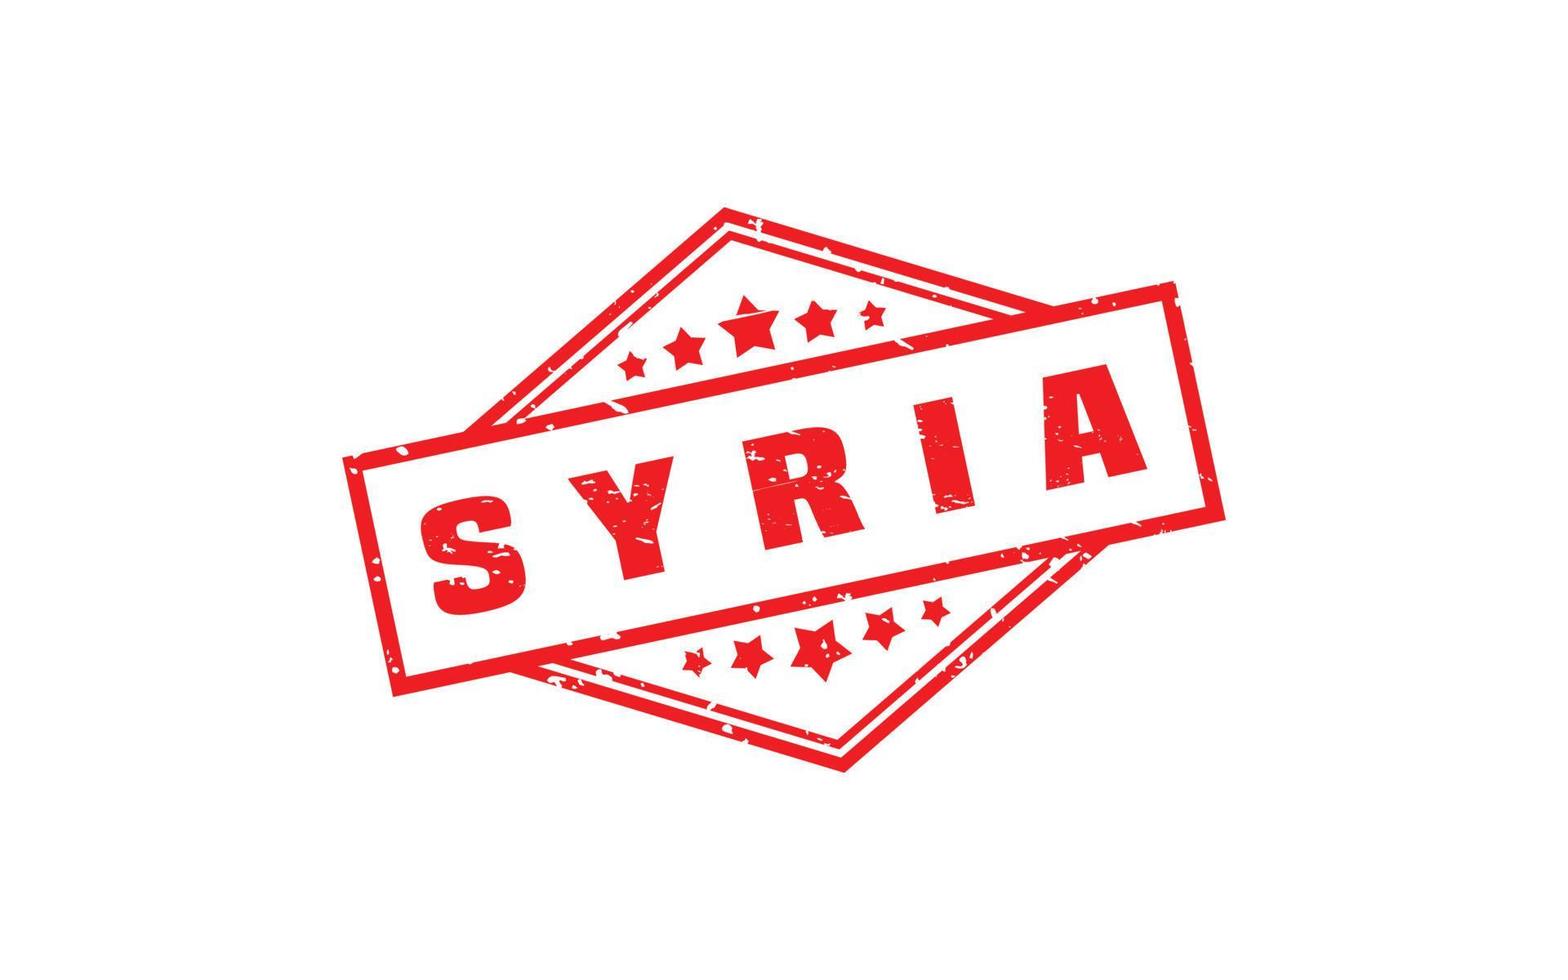 SYRIA stamp rubber with grunge style on white background vector